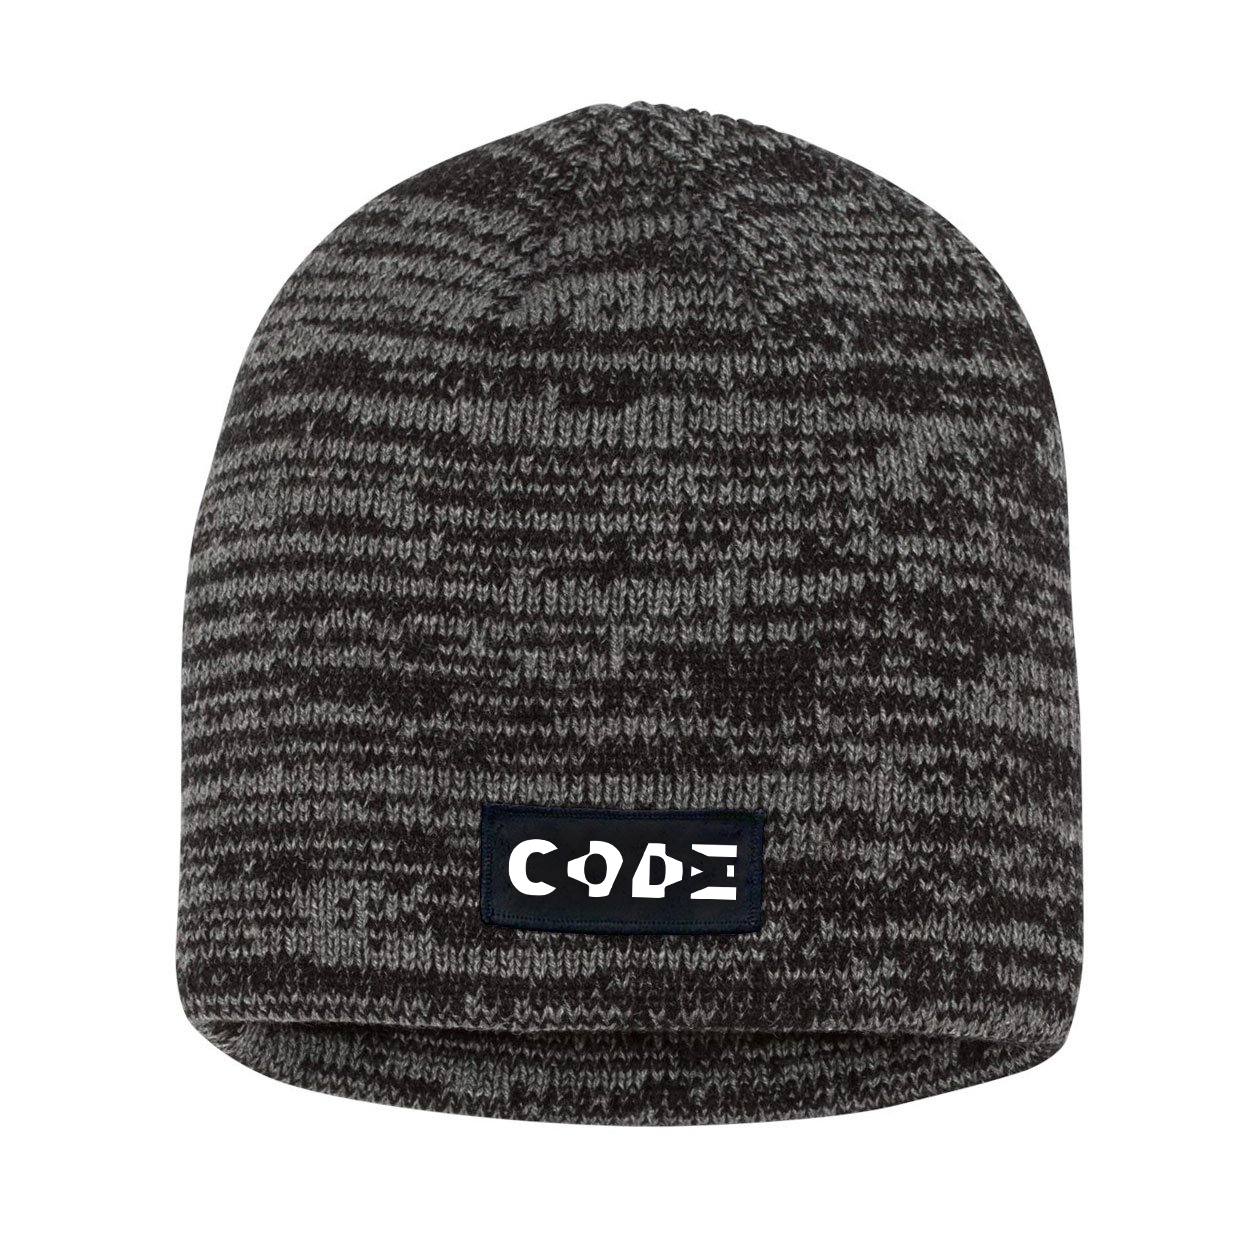 Code Tag Logo Night Out Woven Patch Skully Marled Knit Beanie Black/Gray (White Logo)